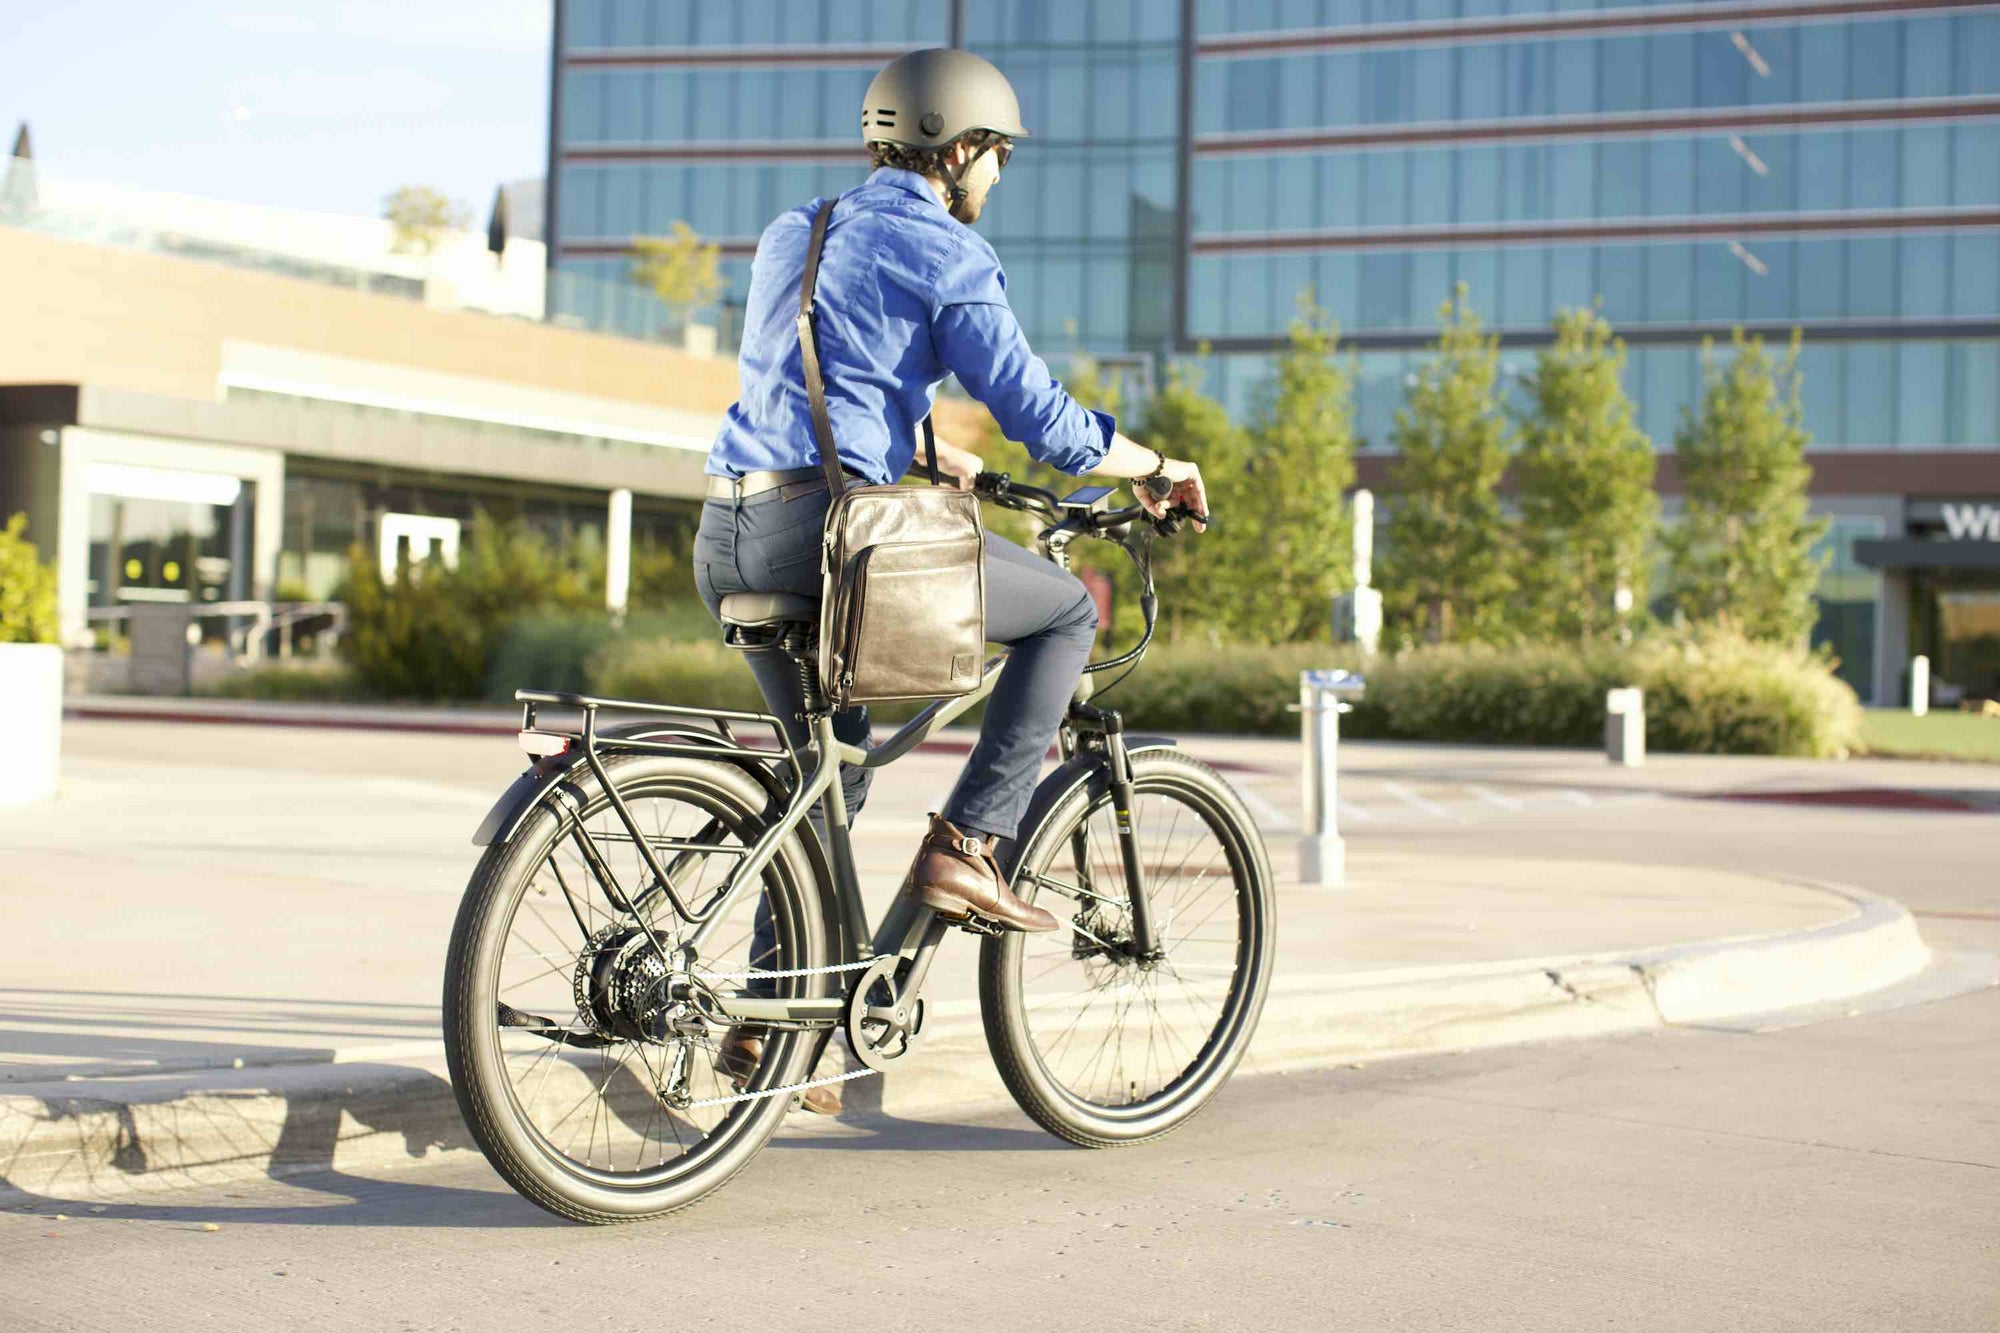 9 eBike safety tips everyone should know